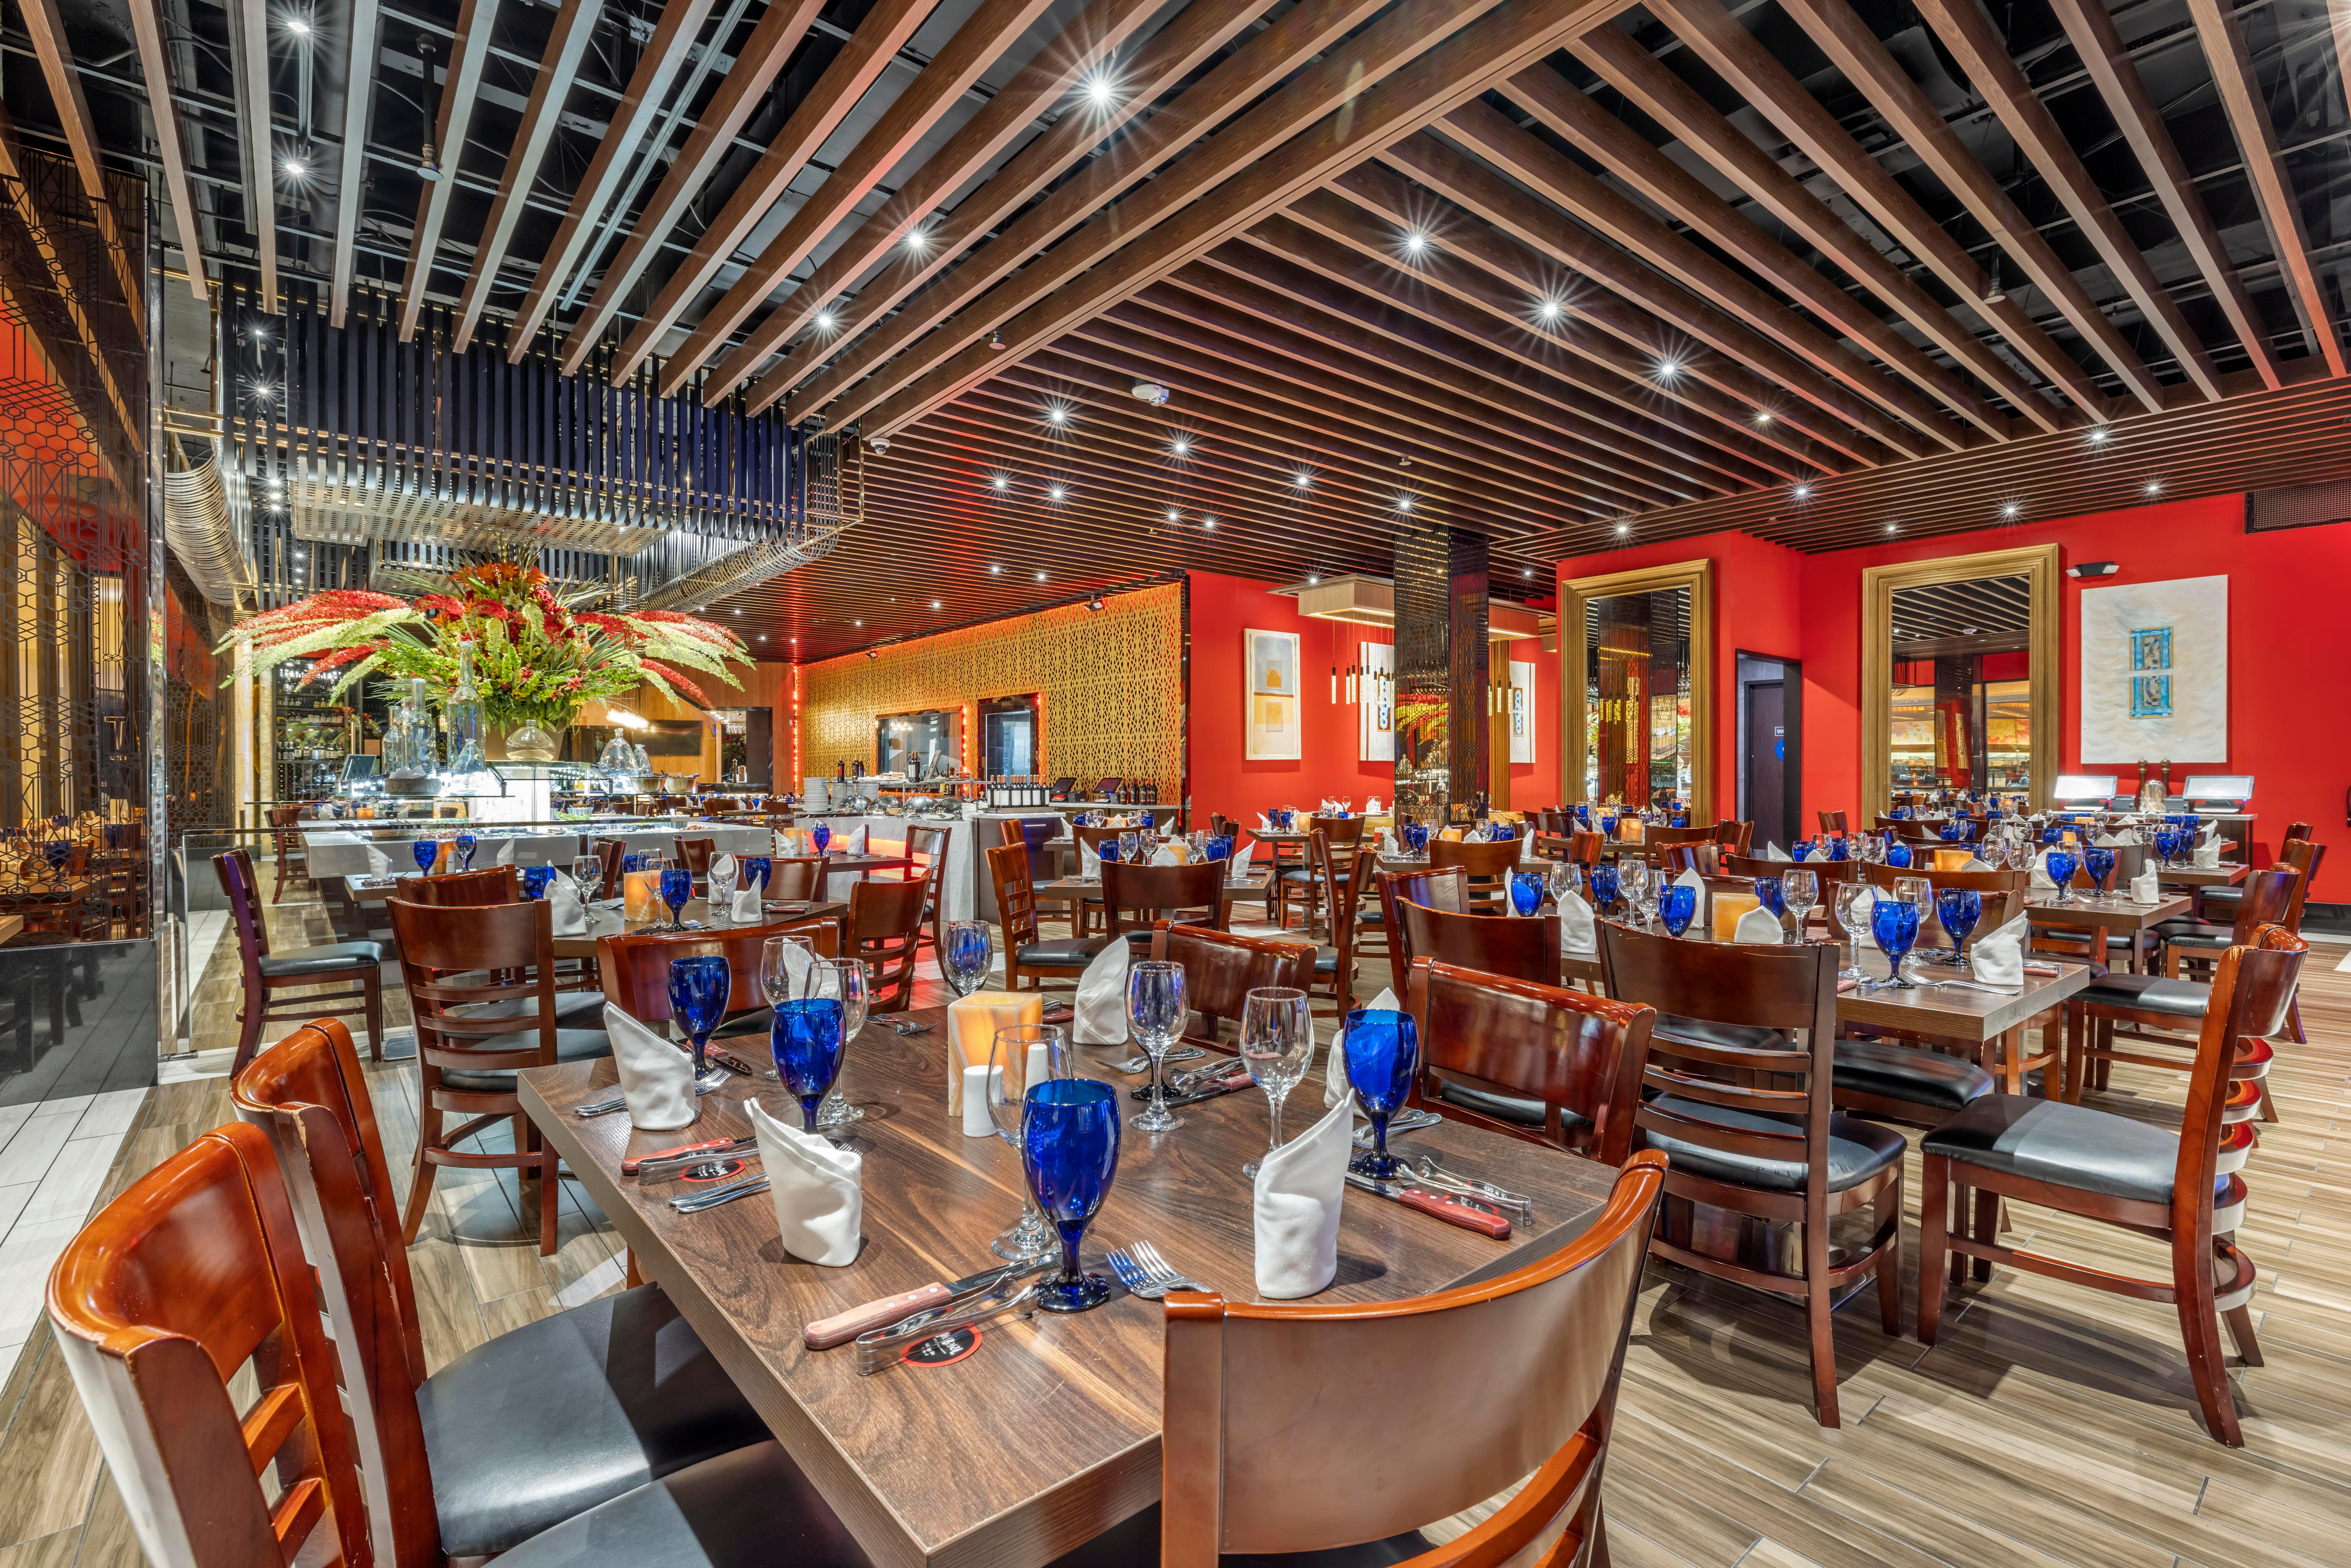 For a memorable gathering join us at Texas de Brazil, where the festivities - and your meal - never end.